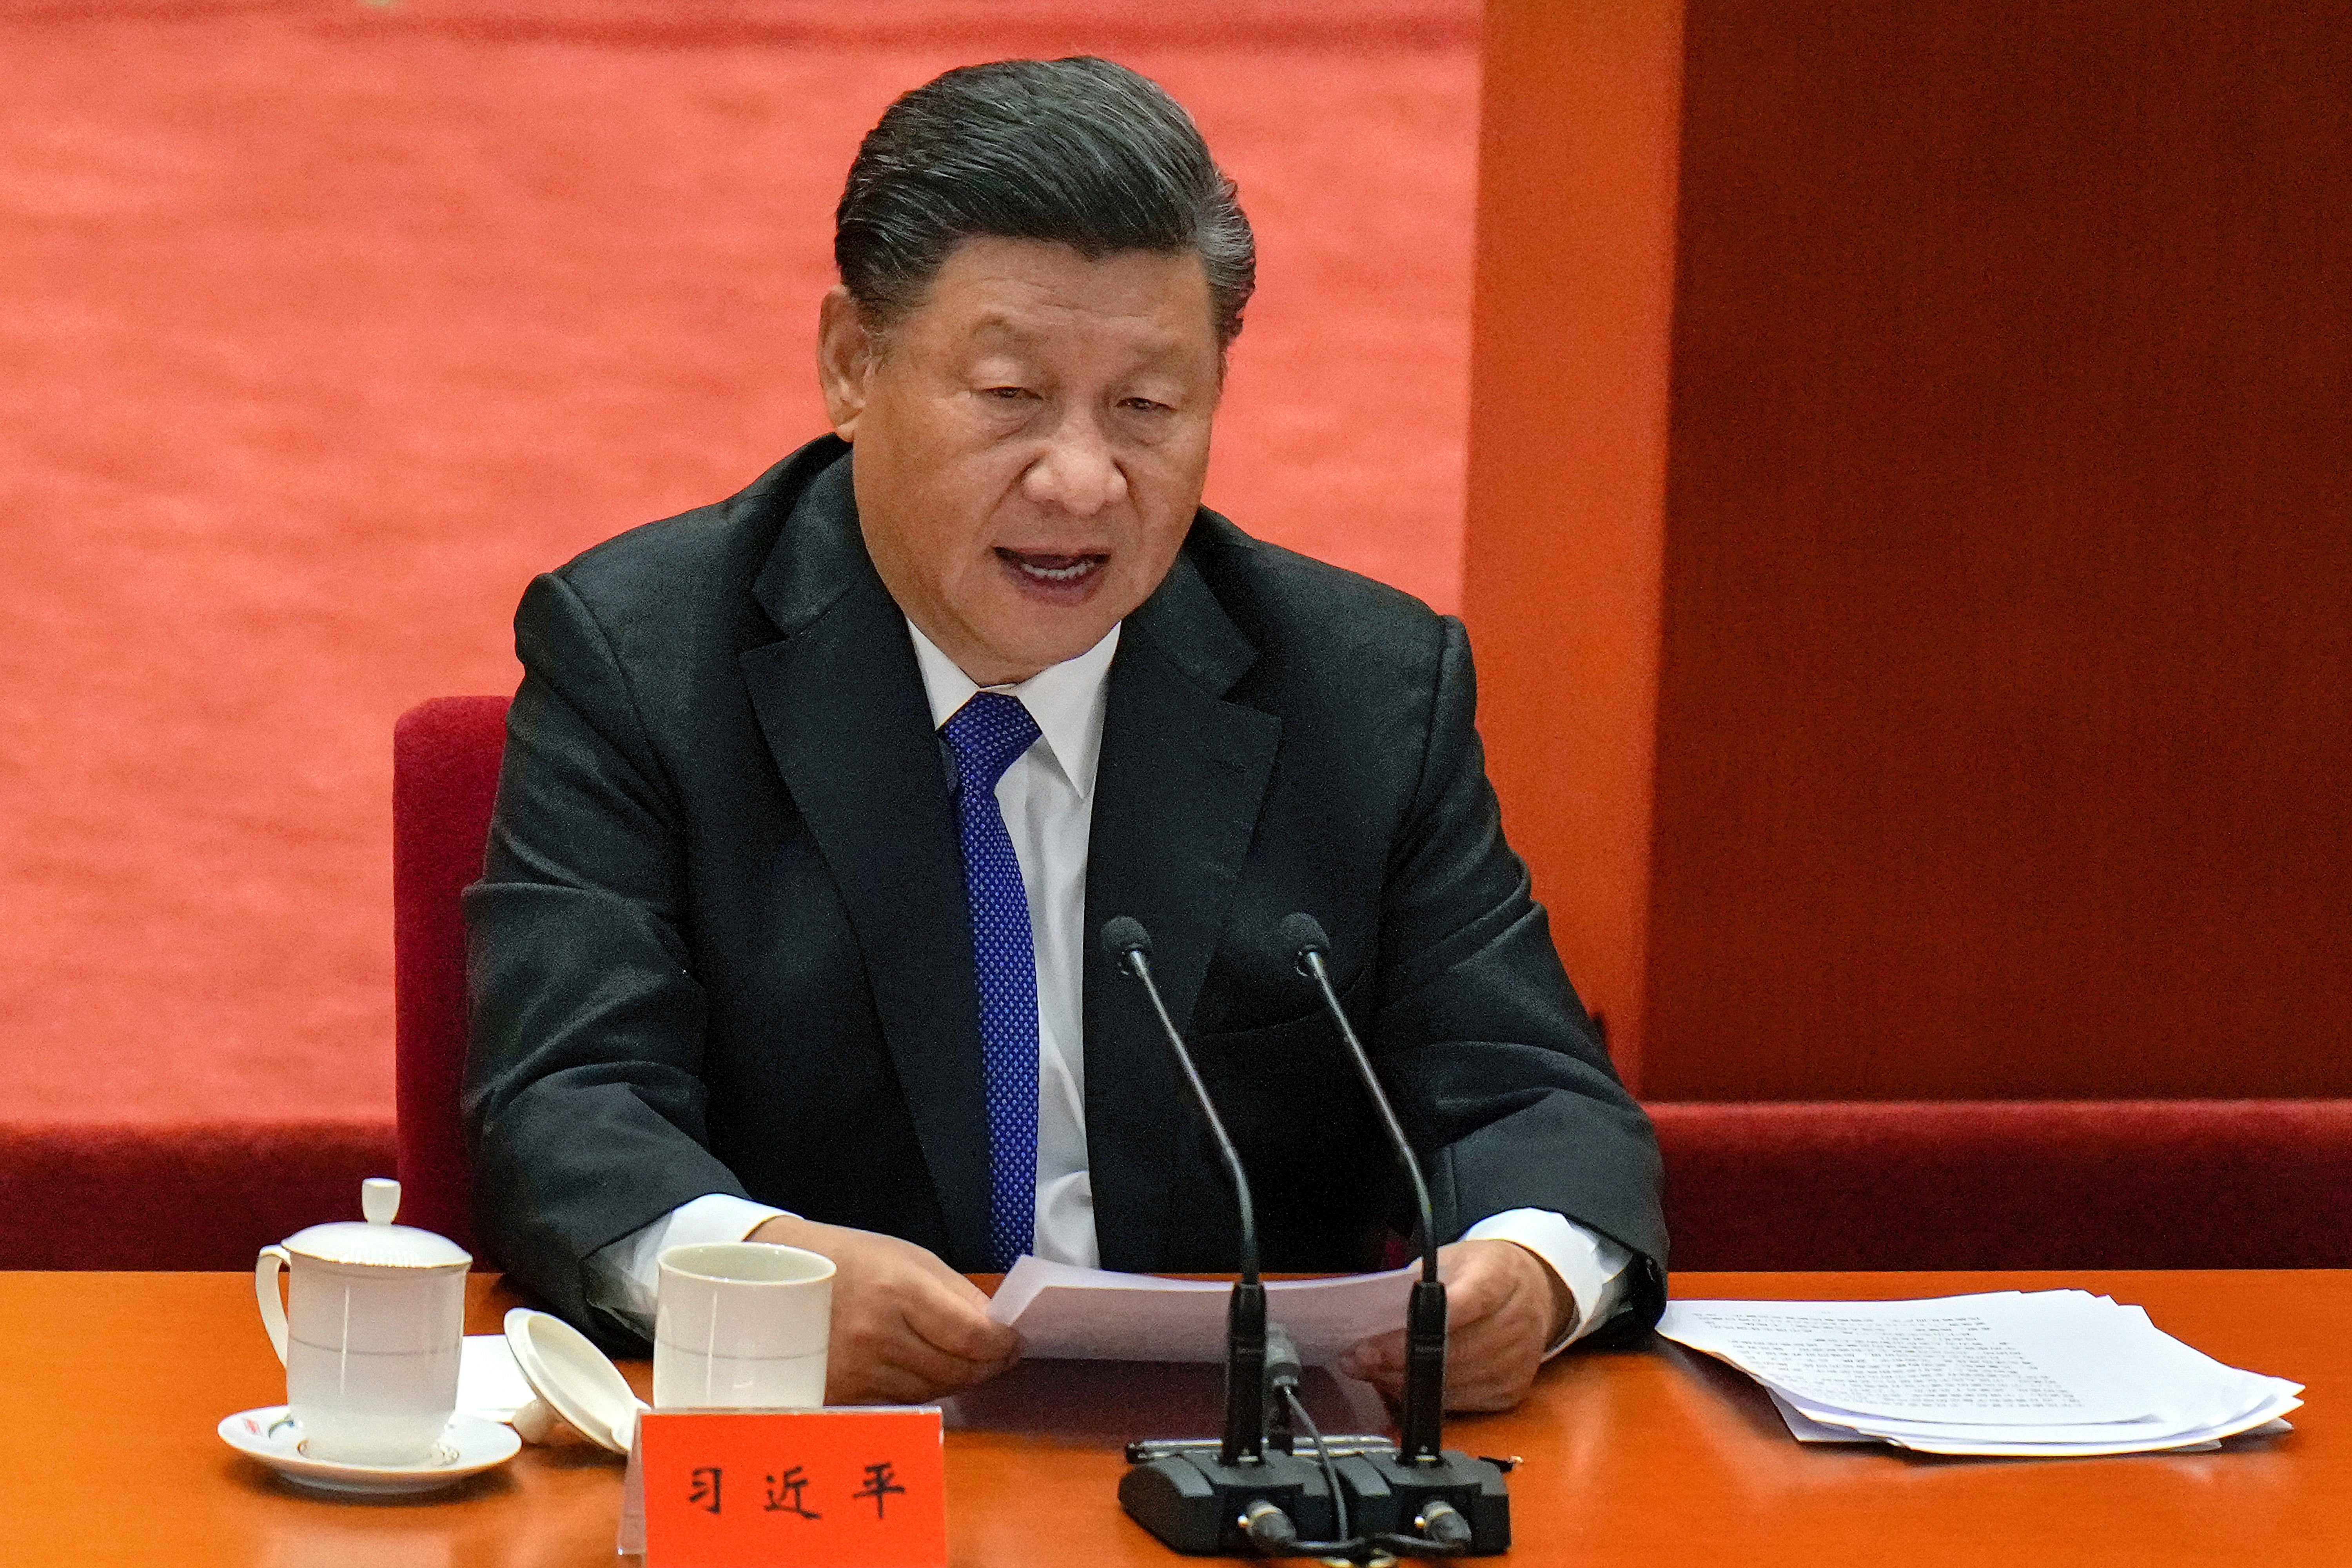 The Chinese president has a reputation for valuing loyalty above all